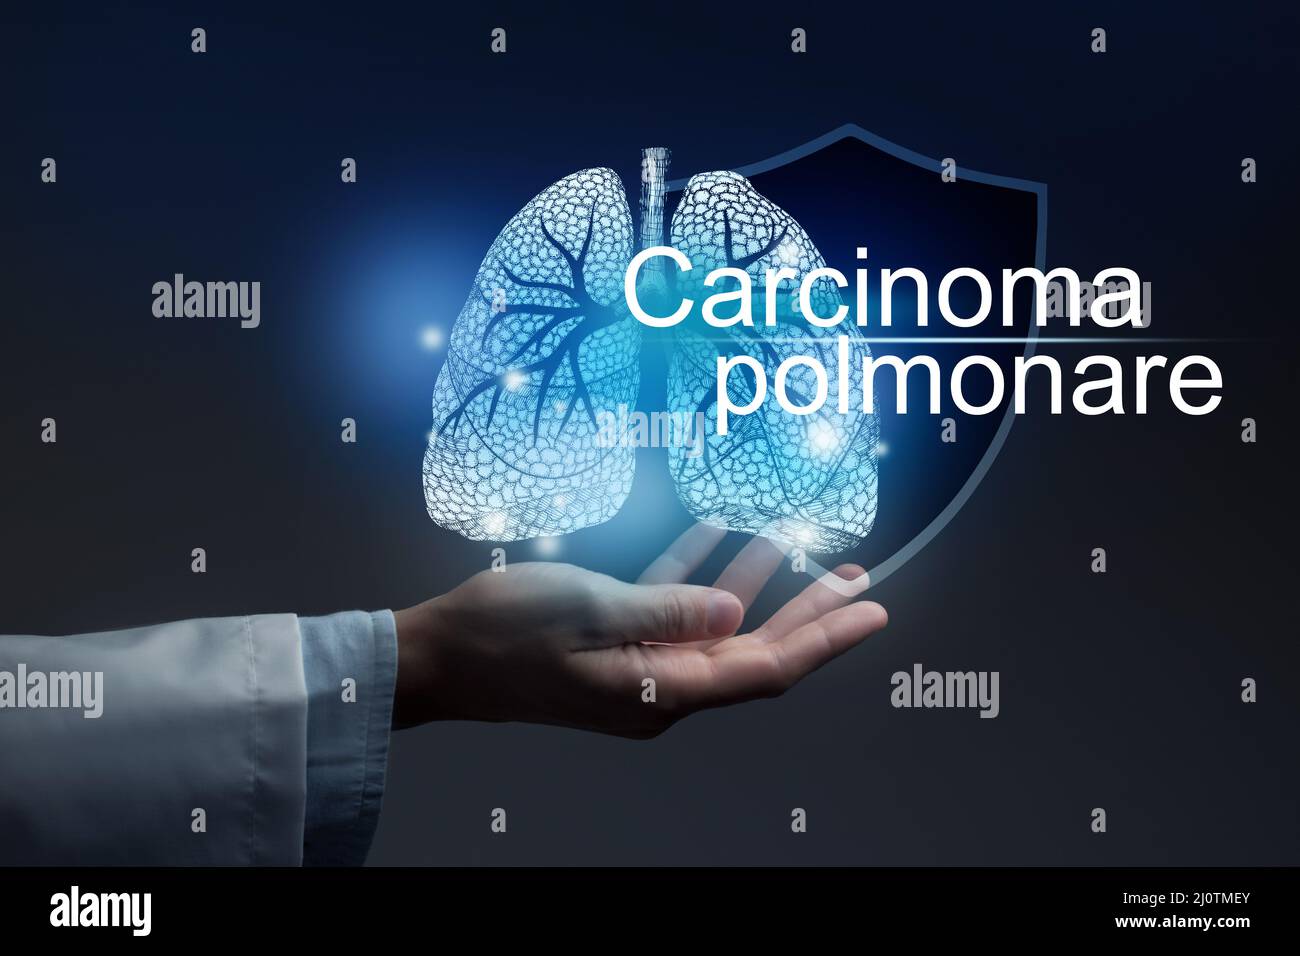 Medical banner Carcinoma with italian translation Carcinoma polmonare on blue background with large copy space Stock Photo